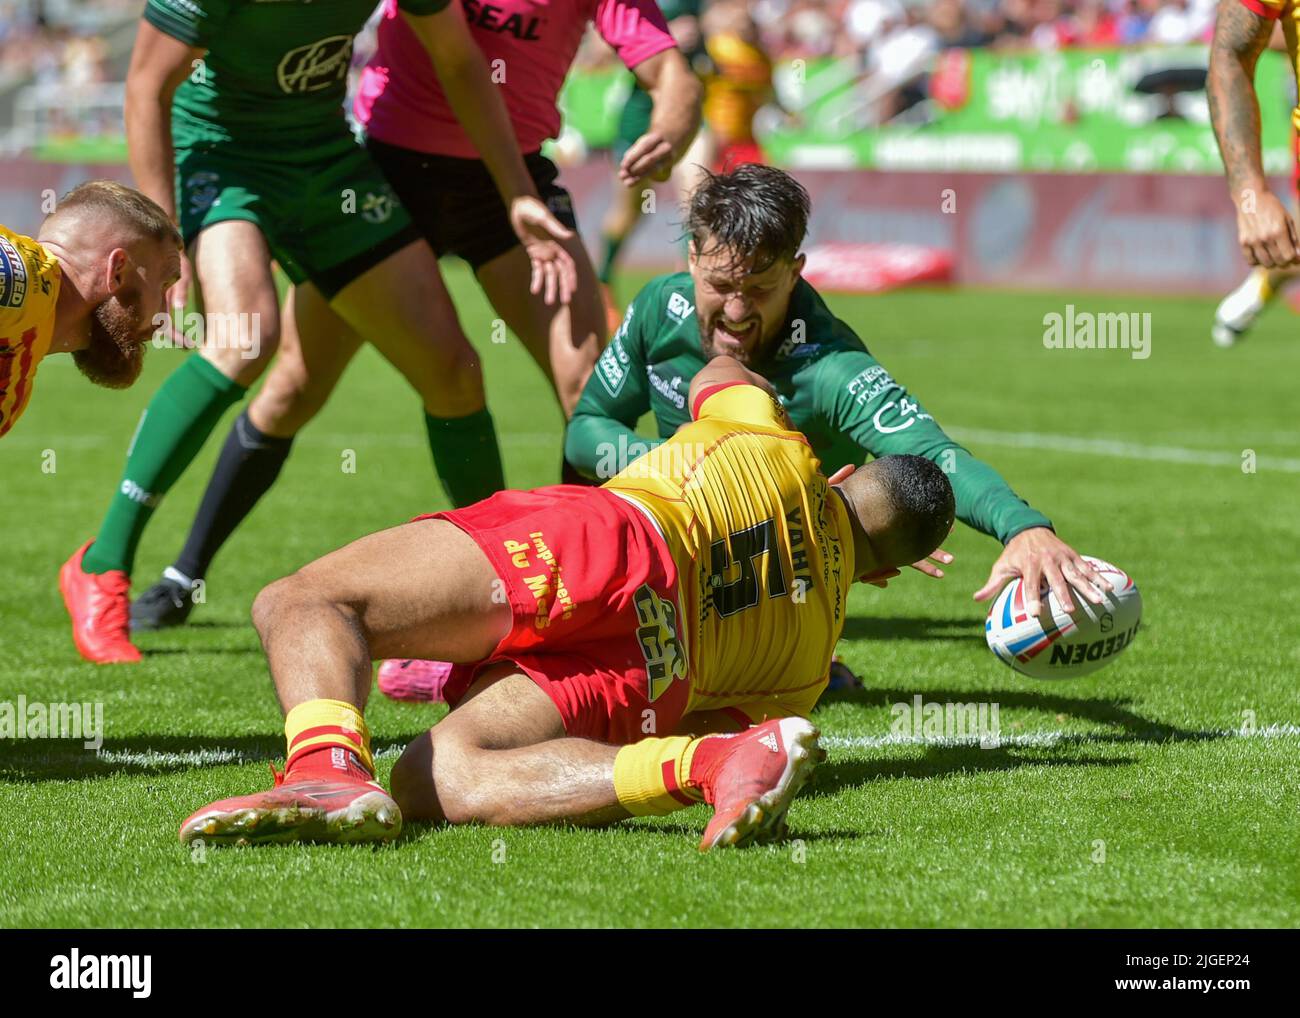 Newcastle, UK. 10th July, 2022. Gareth Widdop of Warrington Wolves scores a try Catalans Dragons V Warrington Wolves Event: Magic Weekend 2022 Venue: St James Park, Newcastle, UK Date: 10th July 2022 Credit: Craig Cresswell/Alamy Live News Stock Photo